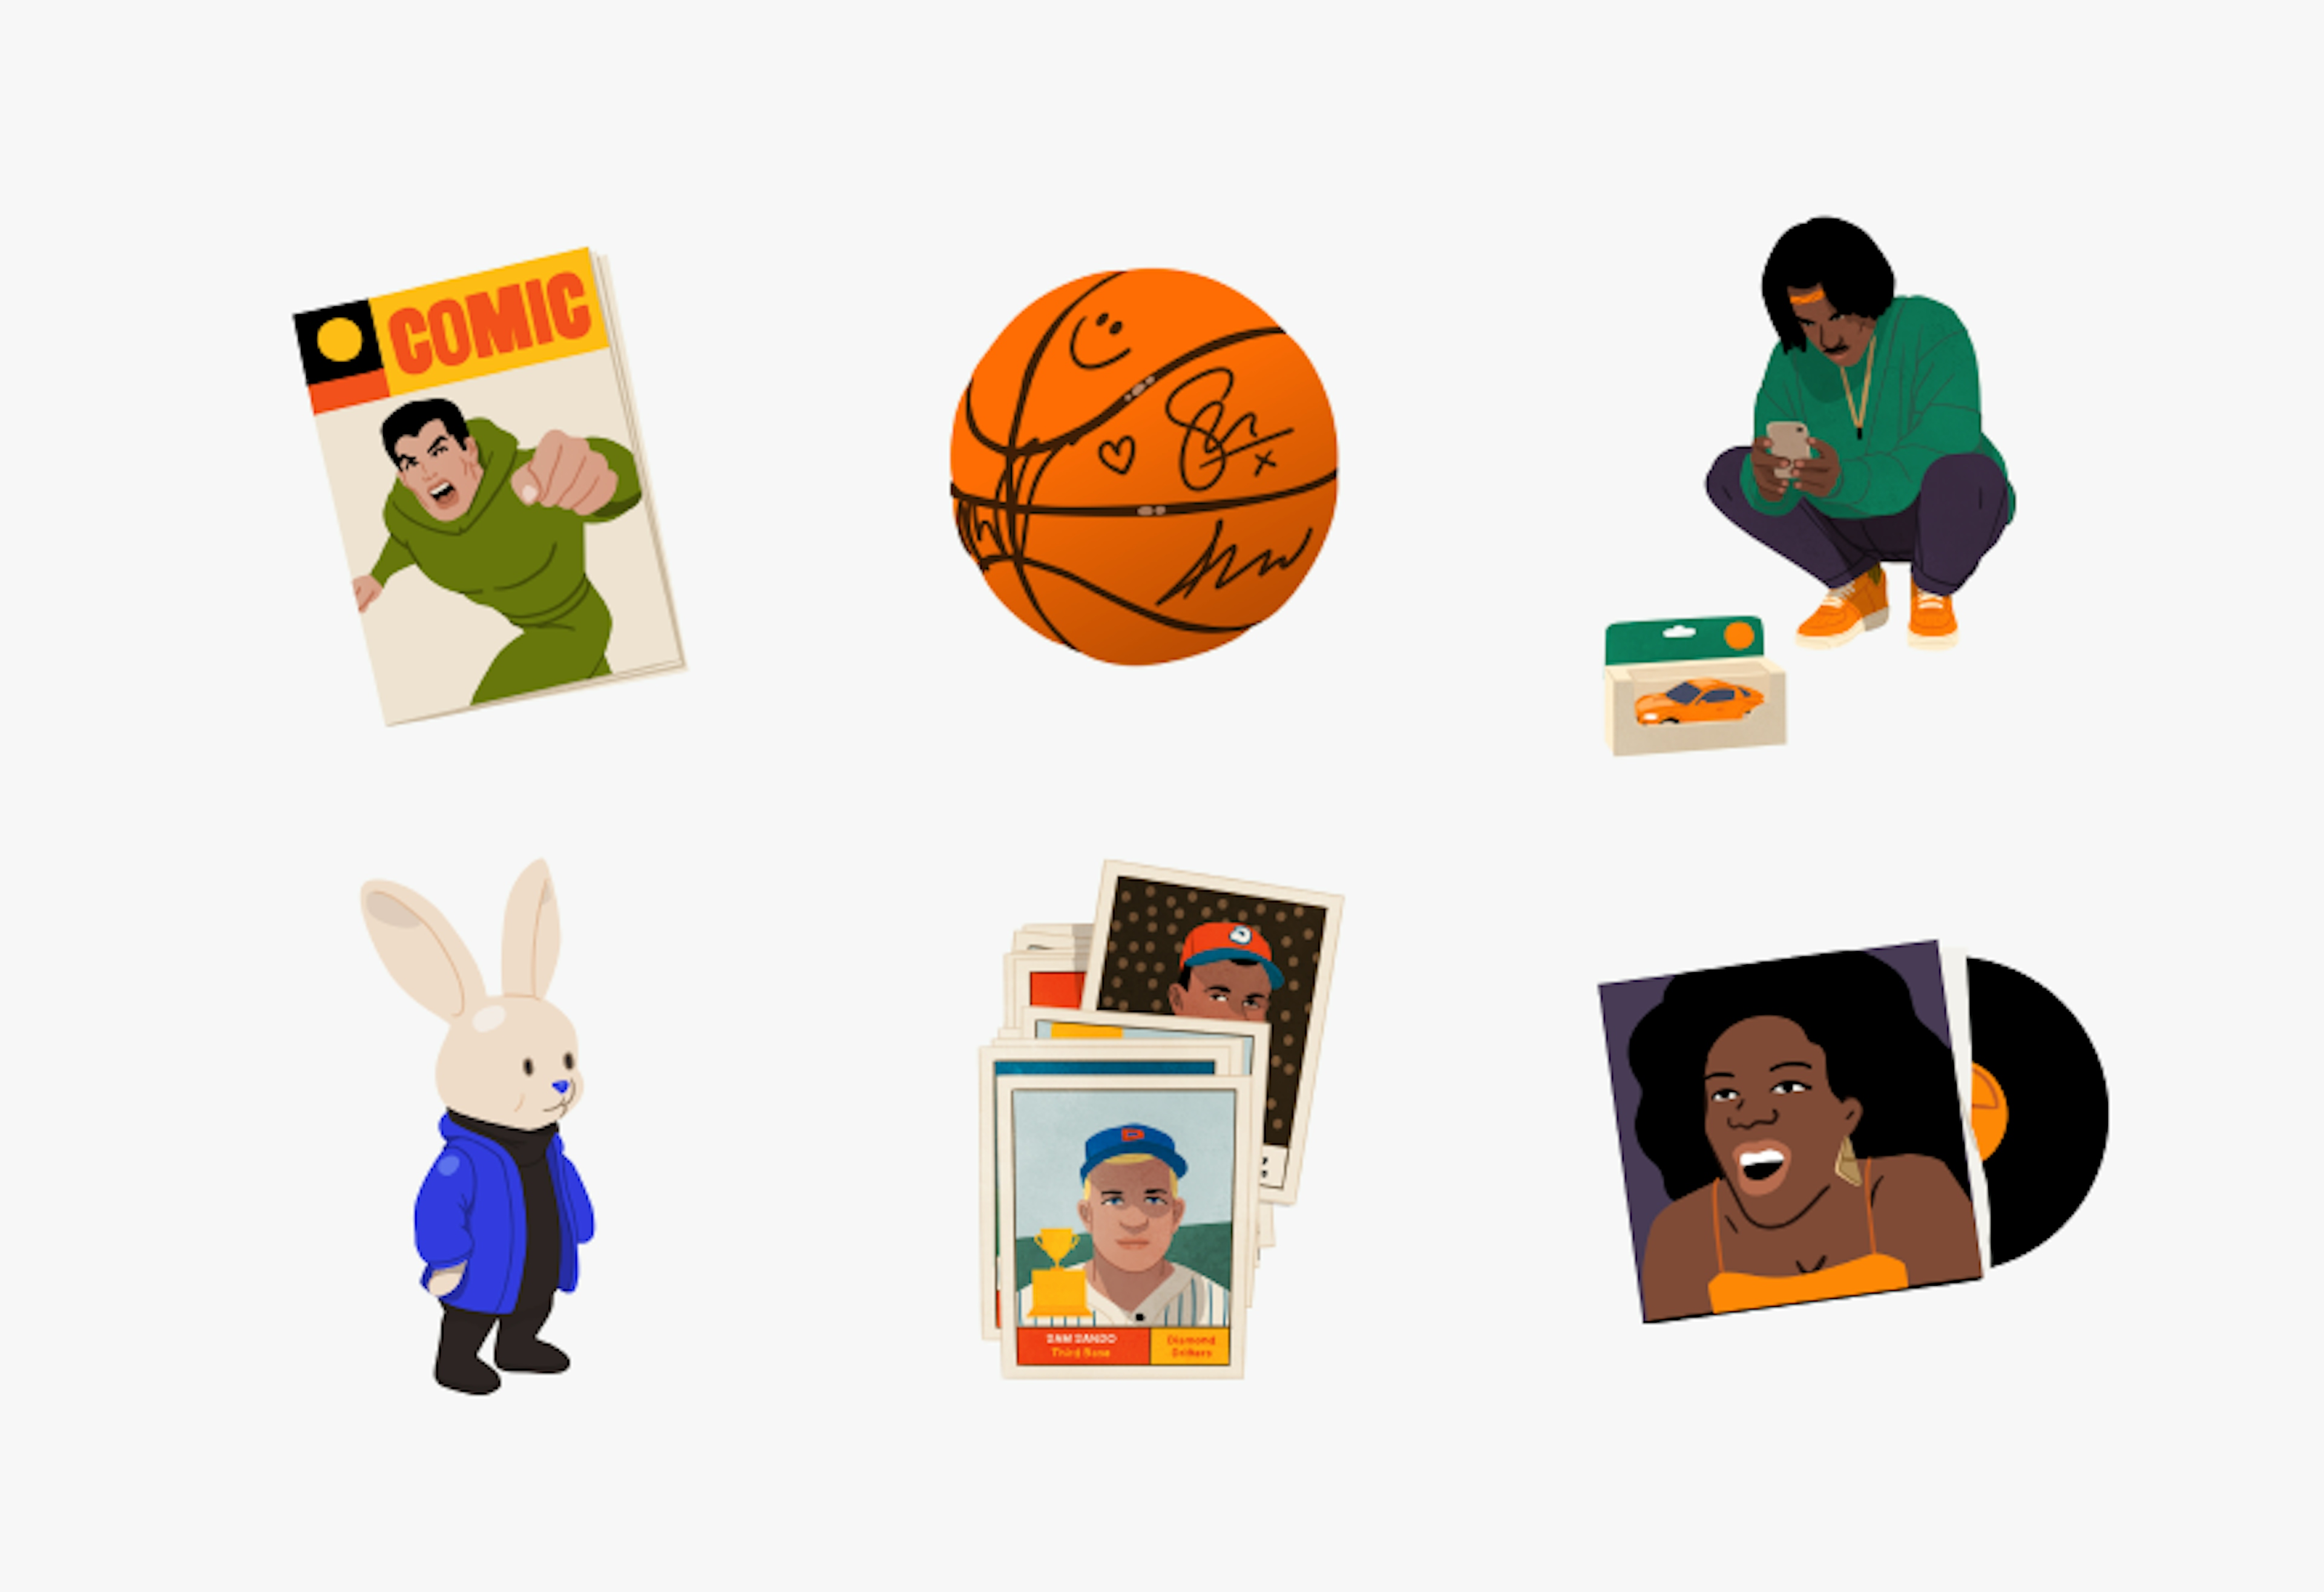 6 distinct illustrations highlighting the collectibles category:
A comic book with a superhero on the cover.
A signed basketball with various doodles.
A person crouching taking a photo with their phone of a toy car in a box nearby.
A toy rabbit wearing a blue coat and scarf.
A stack of baseball cards.
A vinyl record with an album cover featuring a singing woman.